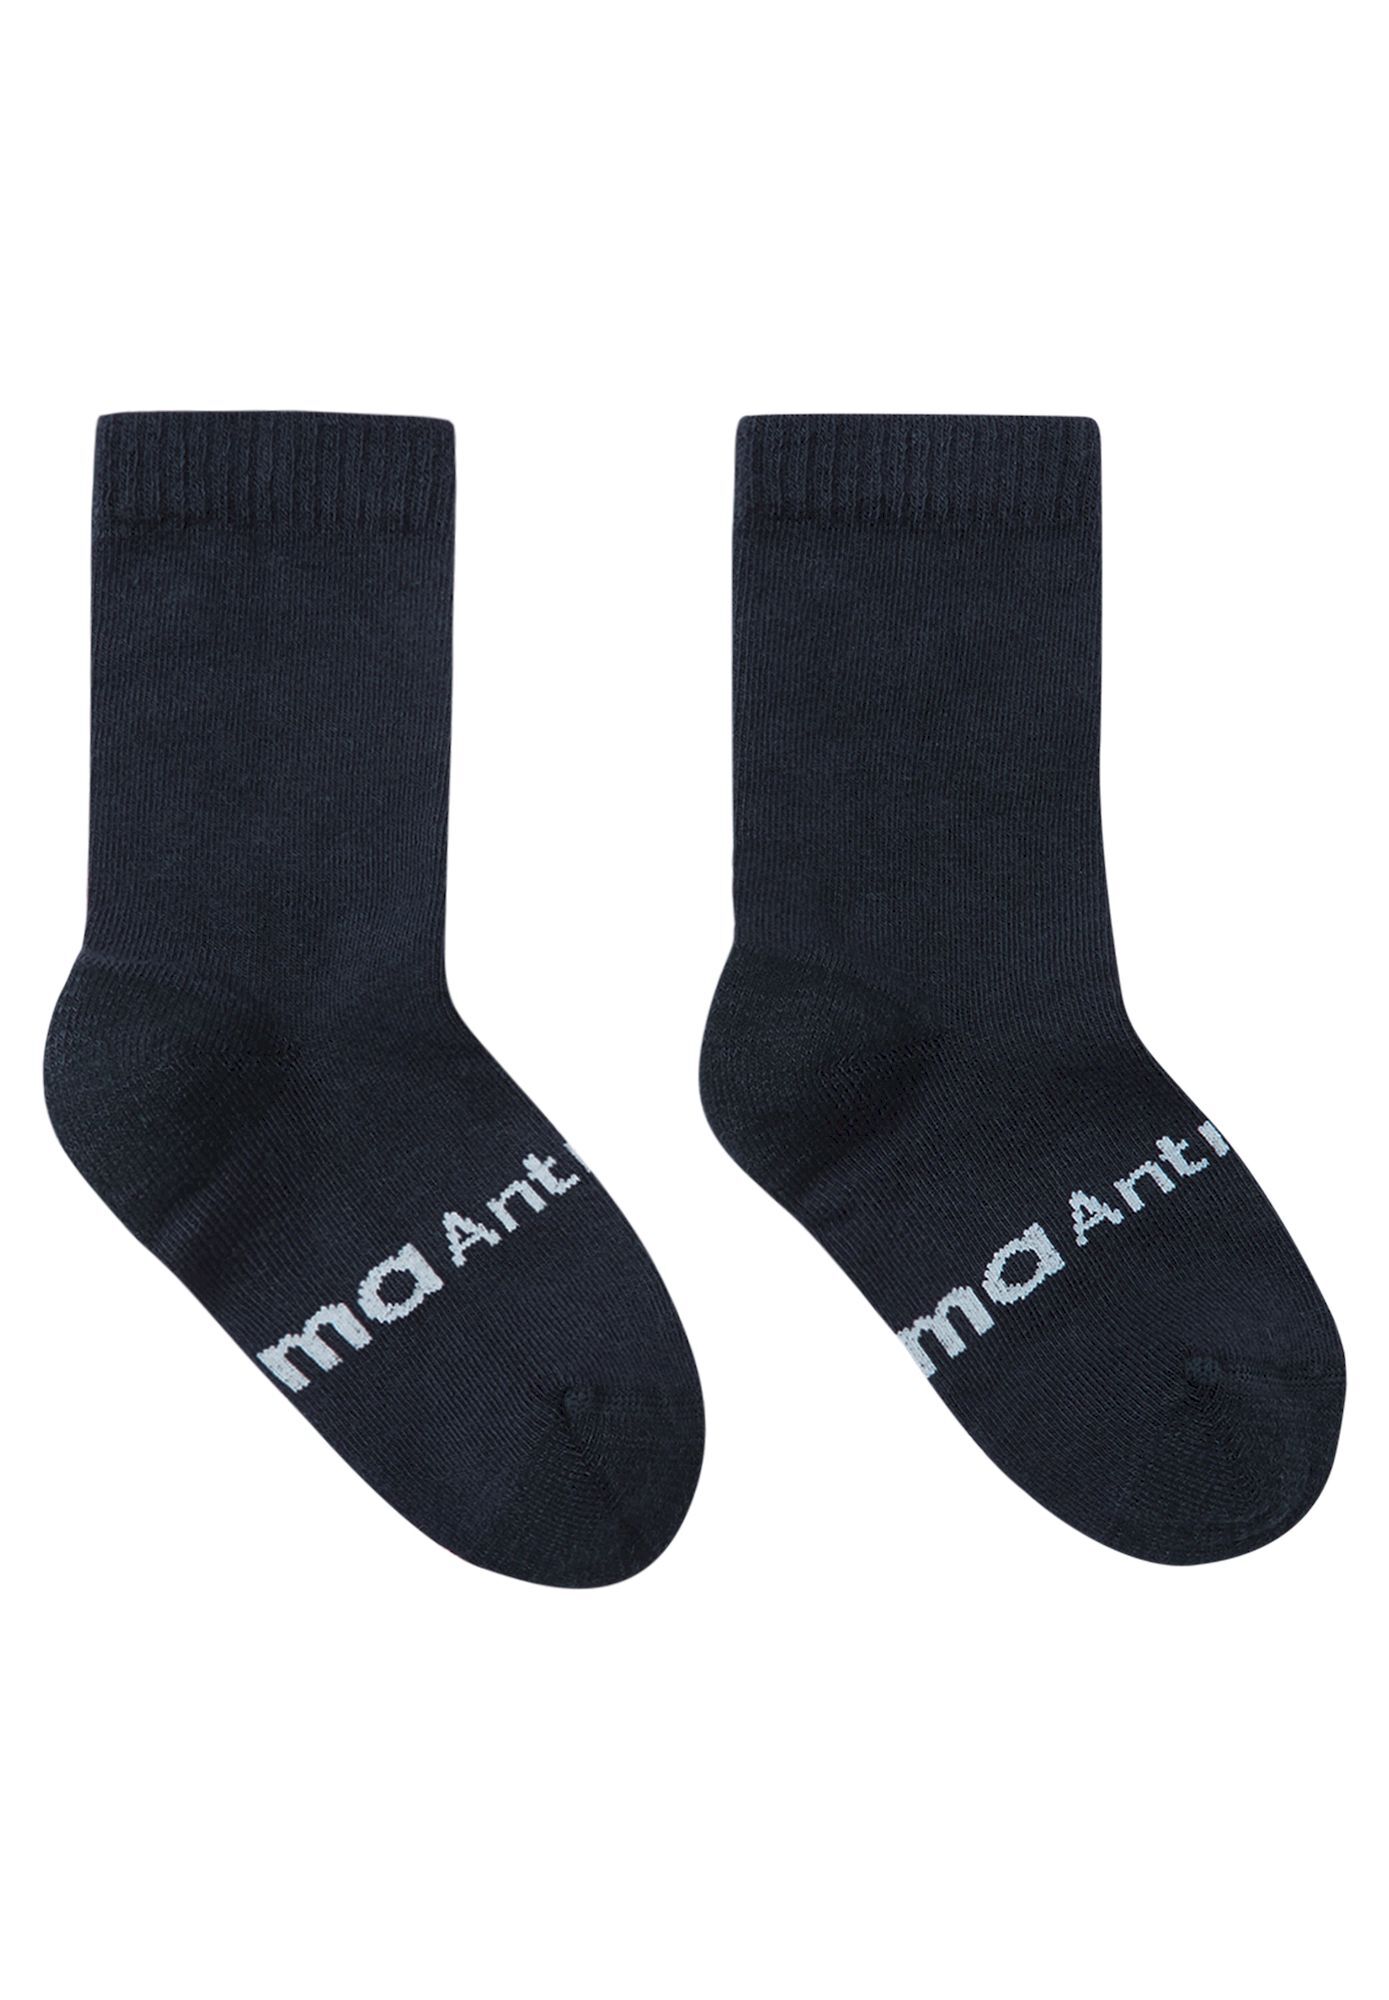 Reima Insect - Insect repellent socks | Hardloop